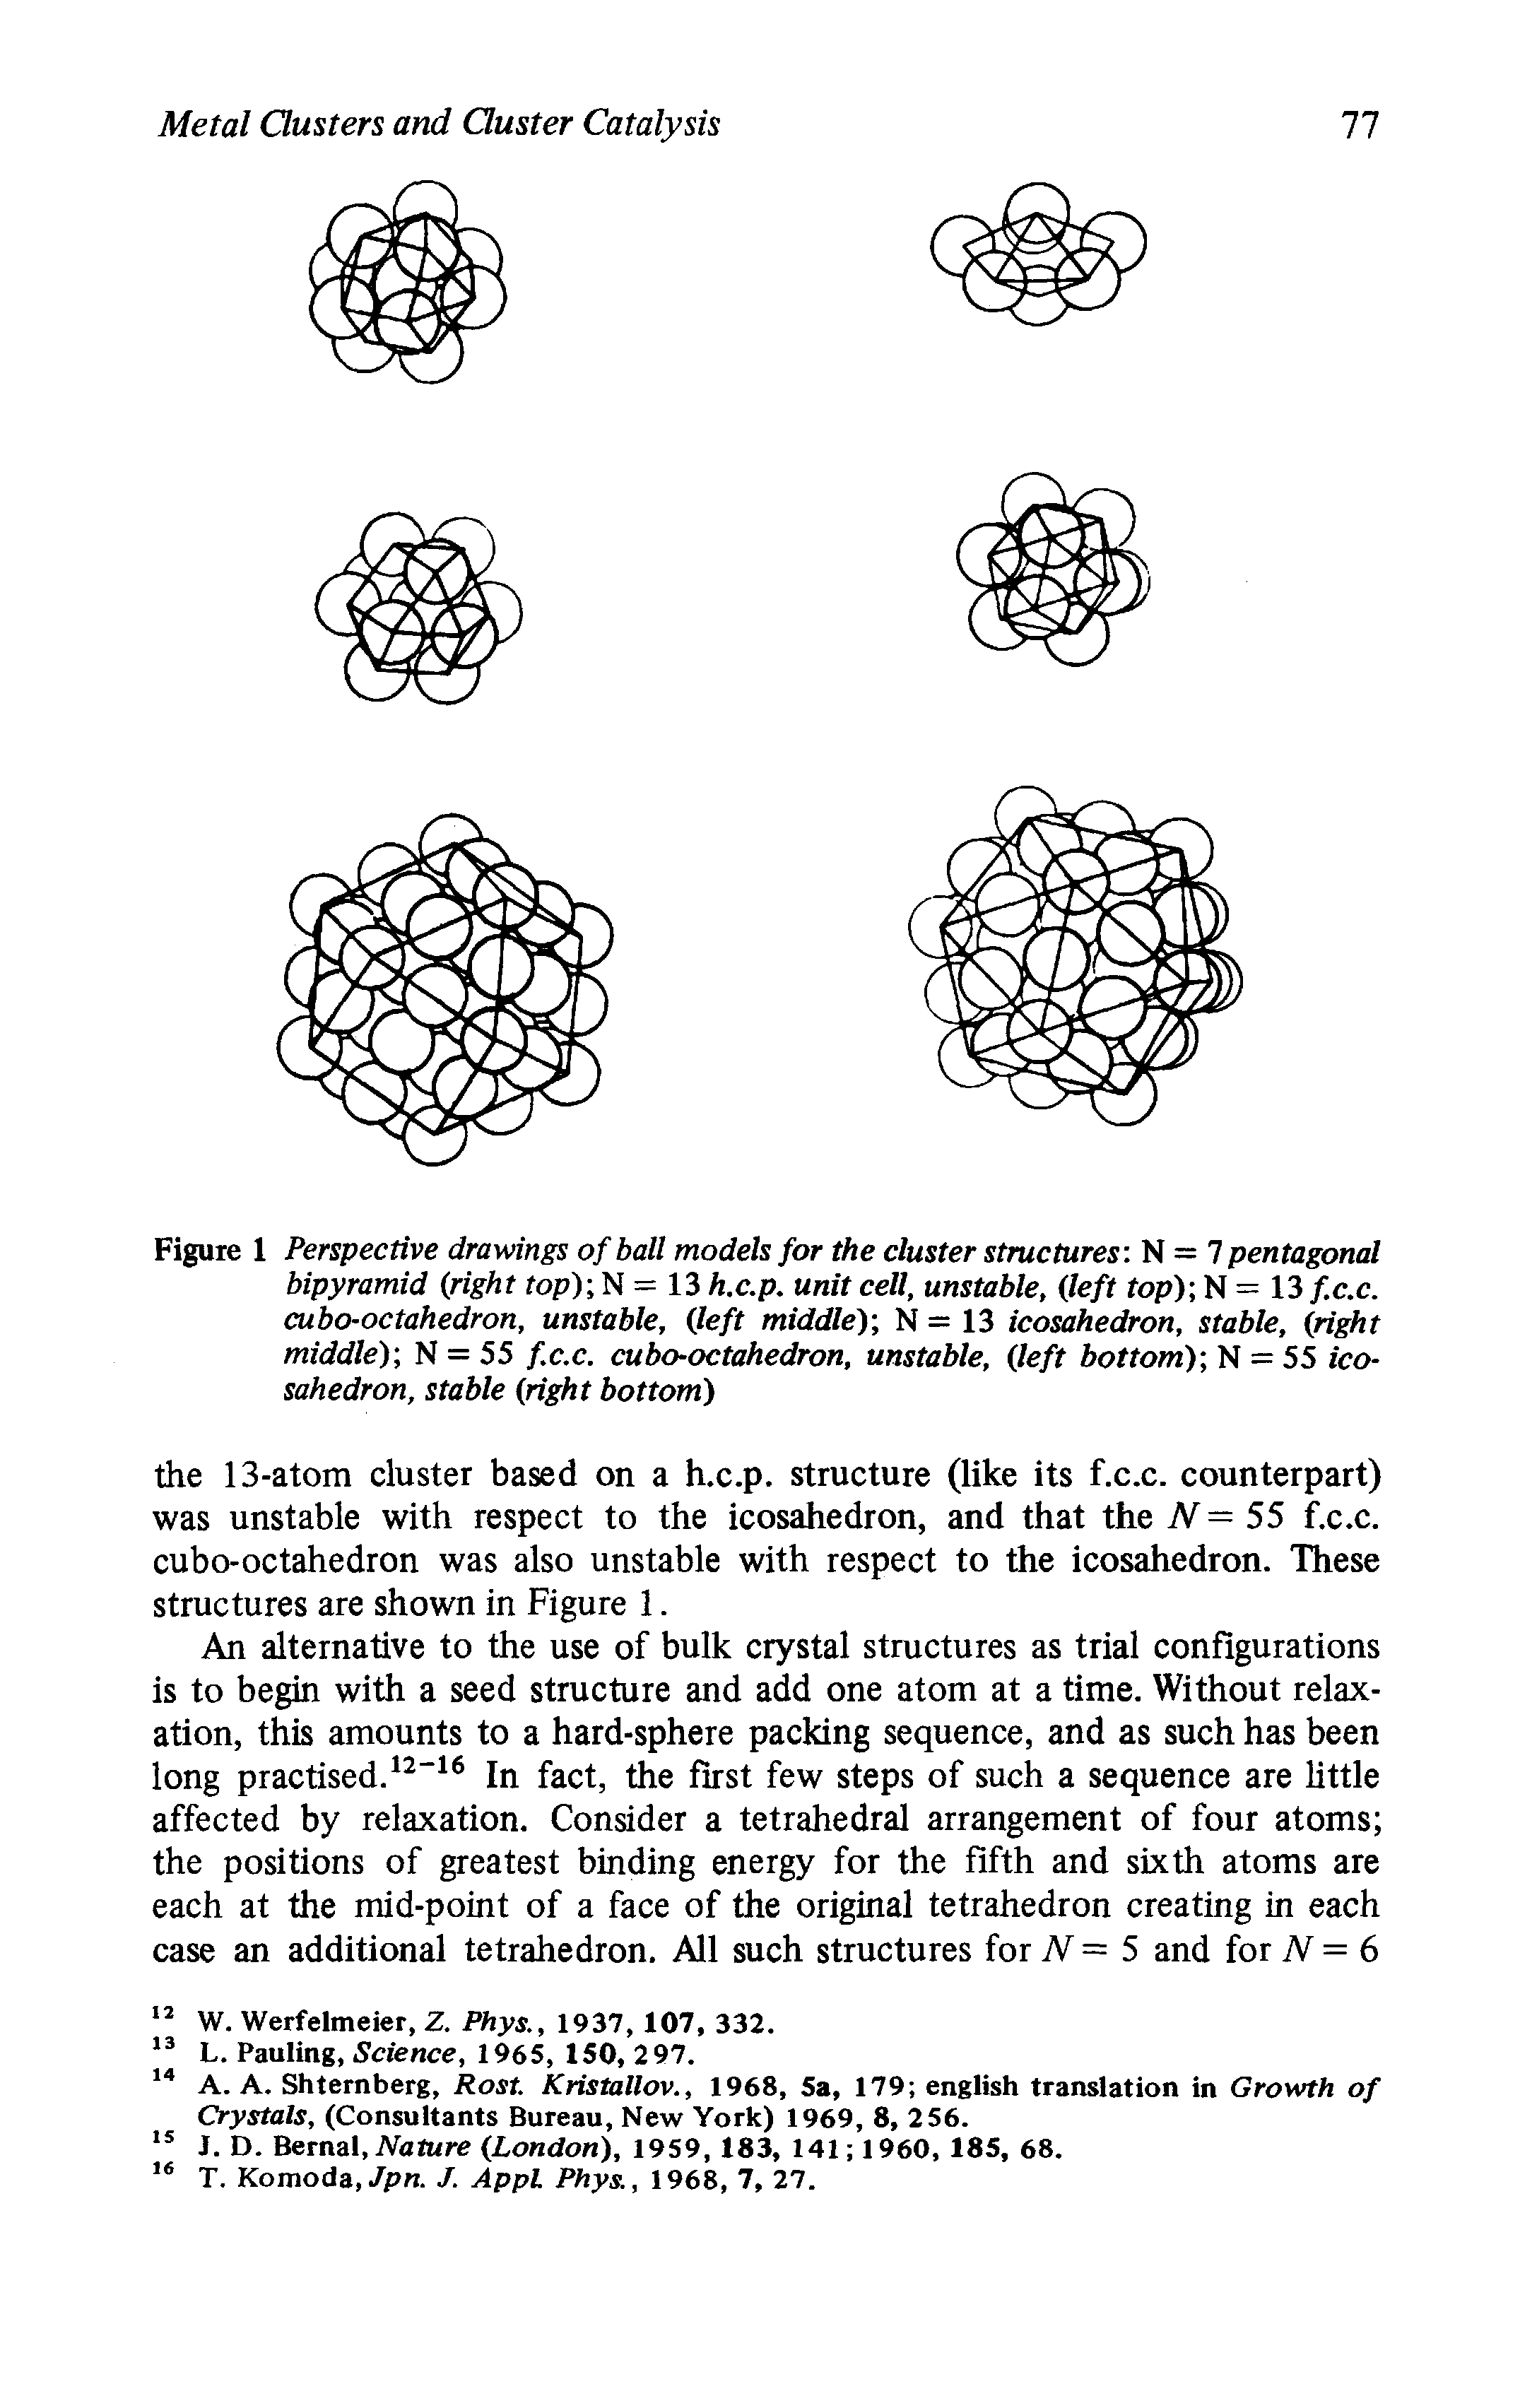 Figure 1 Perspective drawings of ball models for the cluster structures. N = 7 pentagonal bipyramid (right op) N = 13 h.c.p. unit cell, unstable, (left top) N = 13 f.c.c. cubo-octahedron, unstable, (left middle)-, N = 13 icosahedron, stable, (right middle), N = 55 f.c.c. cubo-octahedron, unstable, (left bottom)-, N = 55 icosahedron, stable (right bottom)...